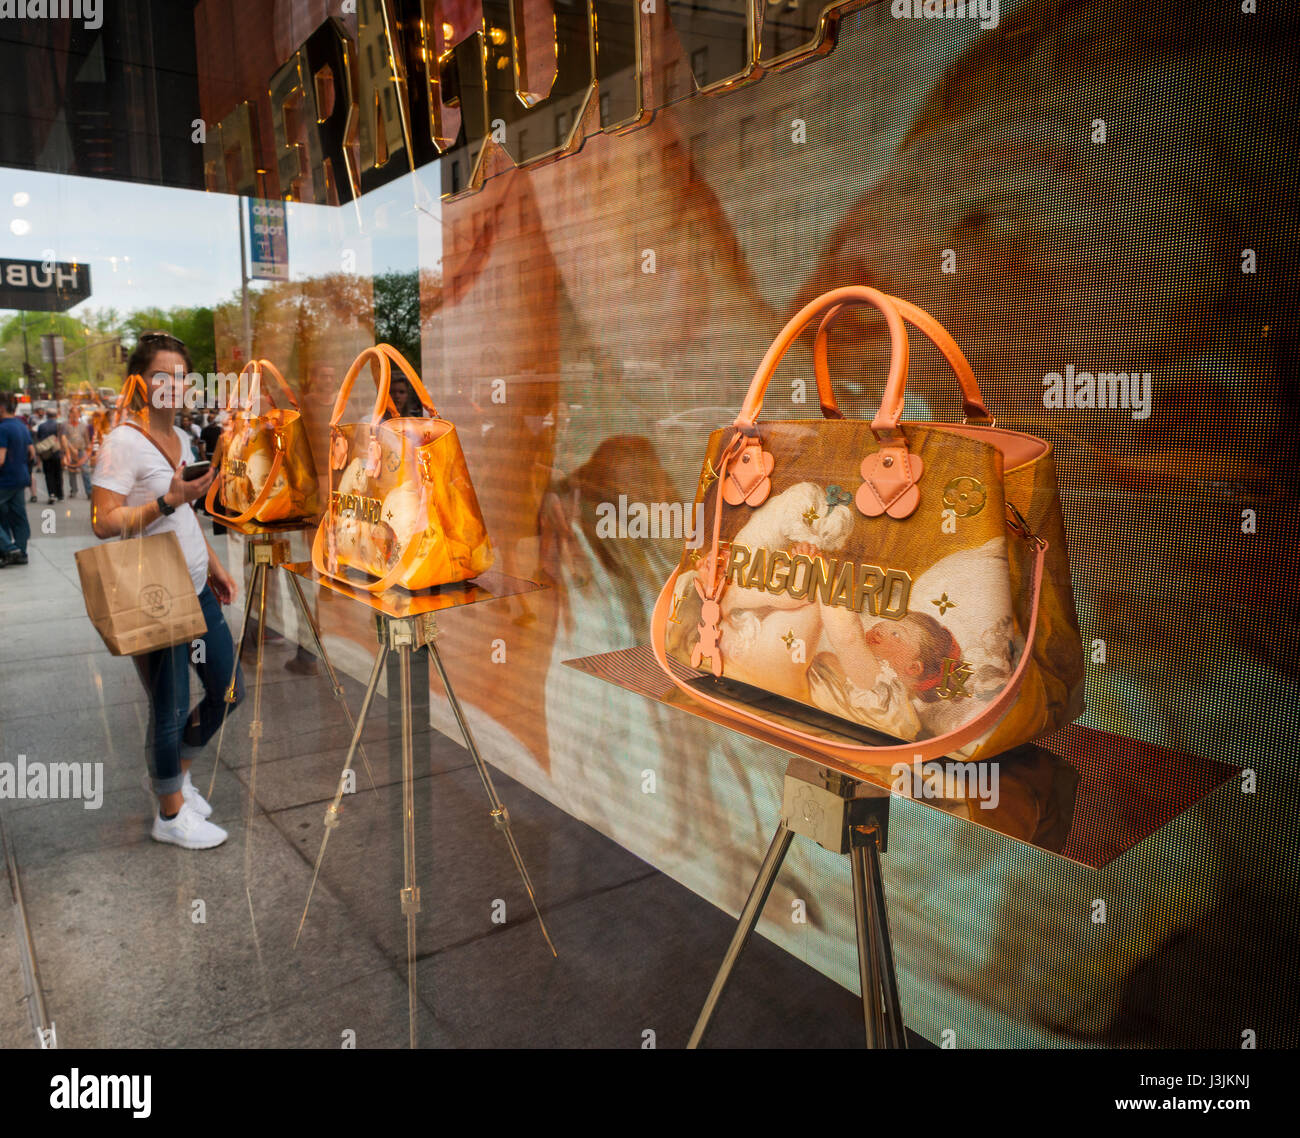 Jeff Koons limited edition handbags are seen in the window of Louis Vuitton  on Fifth Avenue in New York on Saturday, April 29, 2017, The handbags, in  appropriated image style, feature portrayals